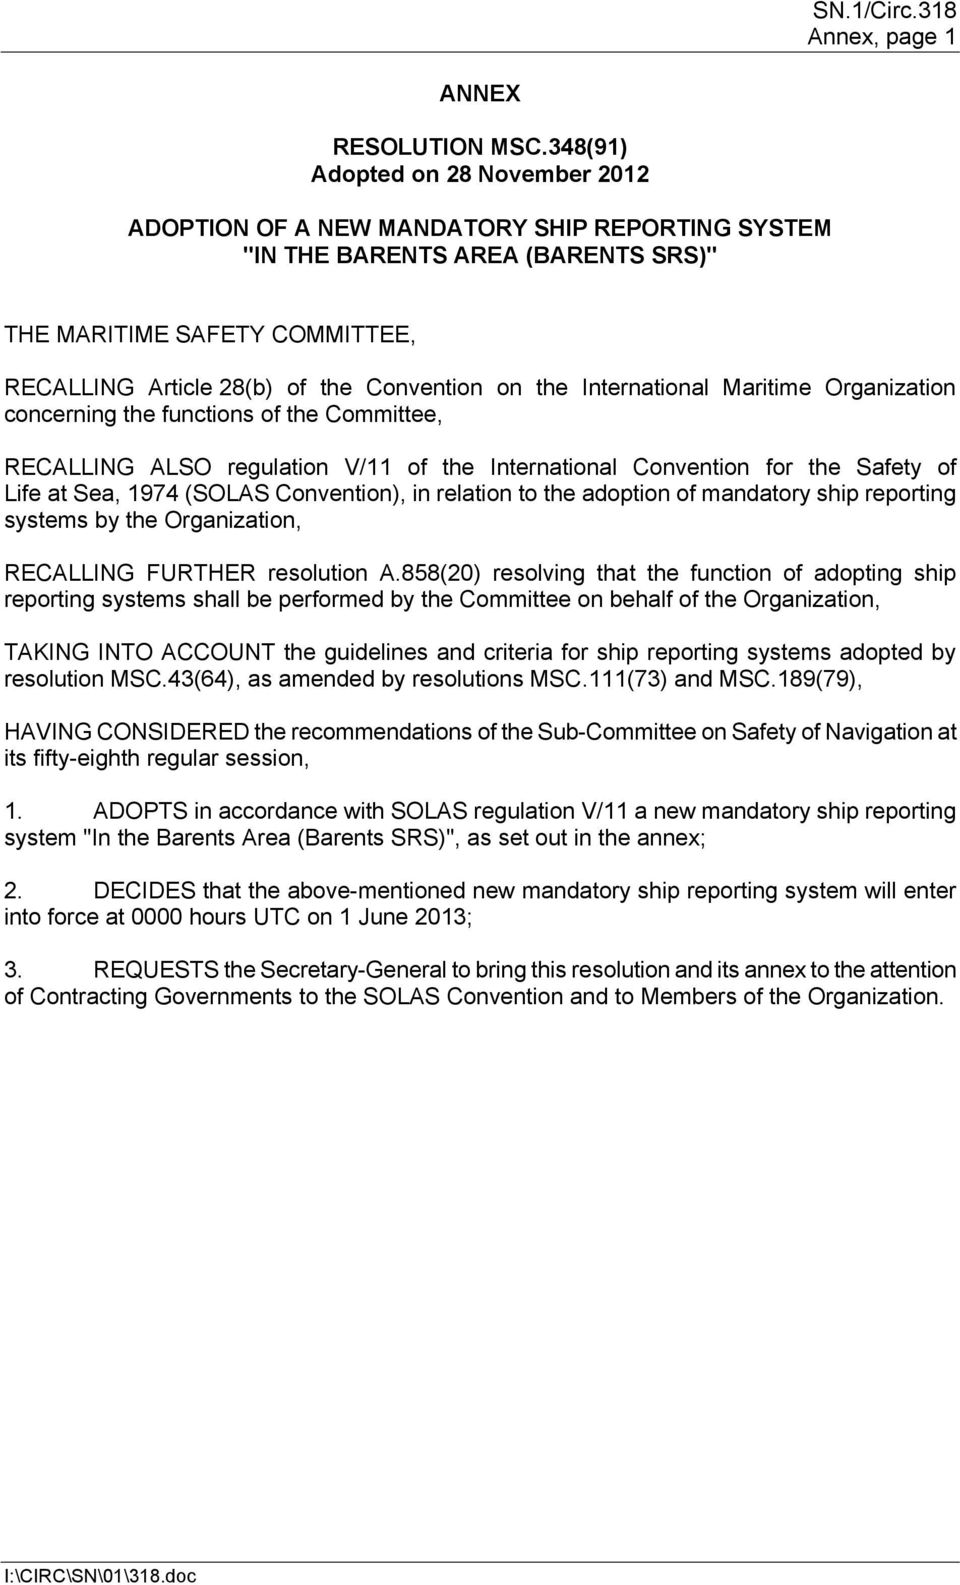 the International Maritime Organization concerning the functions of the Committee, RECALLING ALSO regulation V/11 of the International Convention for the Safety of Life at Sea, 1974 (SOLAS